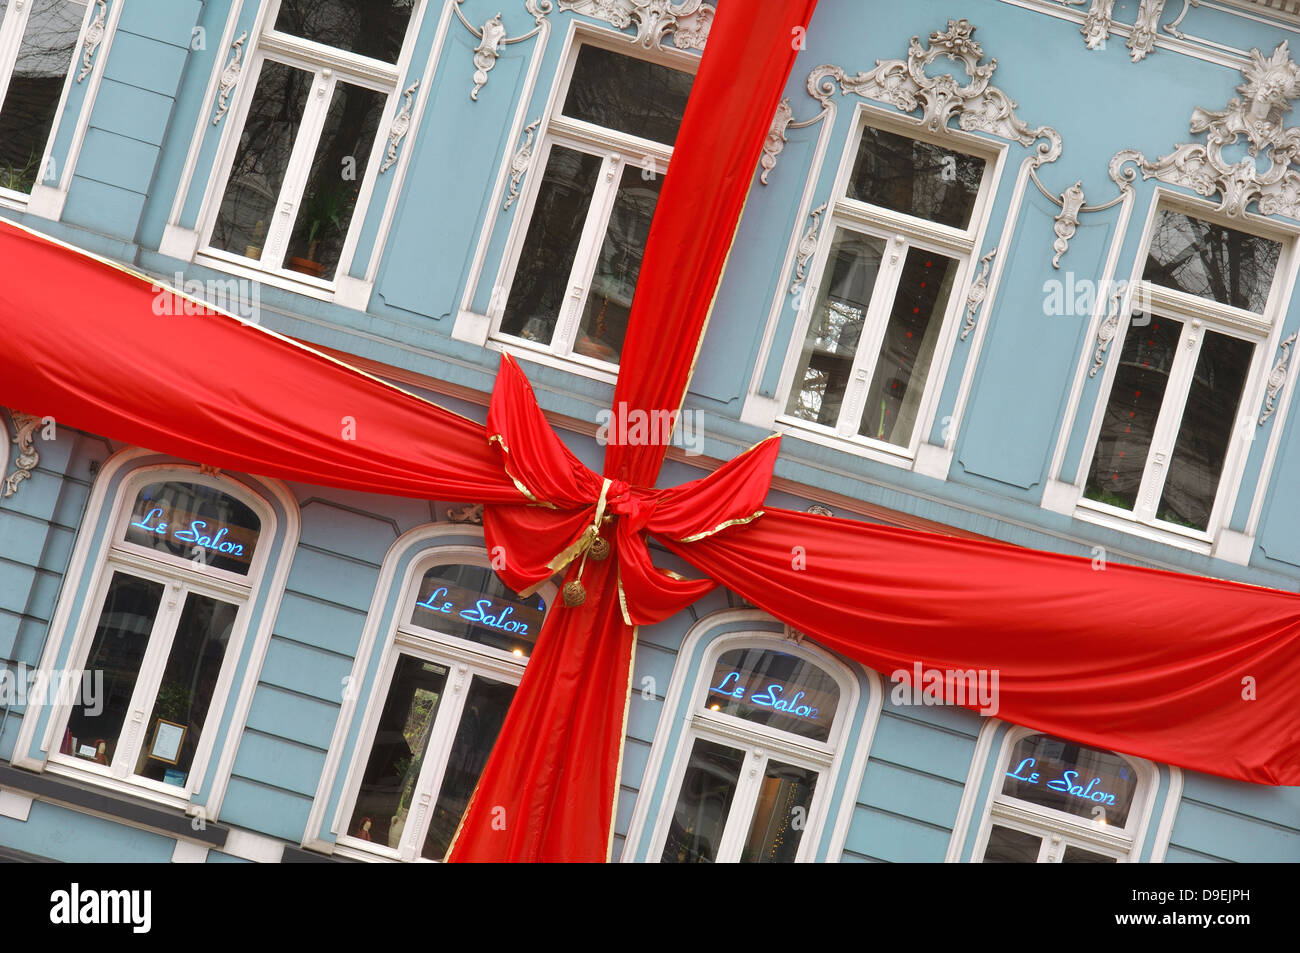 As a present decorated historical town house in the centre of the Rhenish city of Krefeld, Germany. Stock Photo